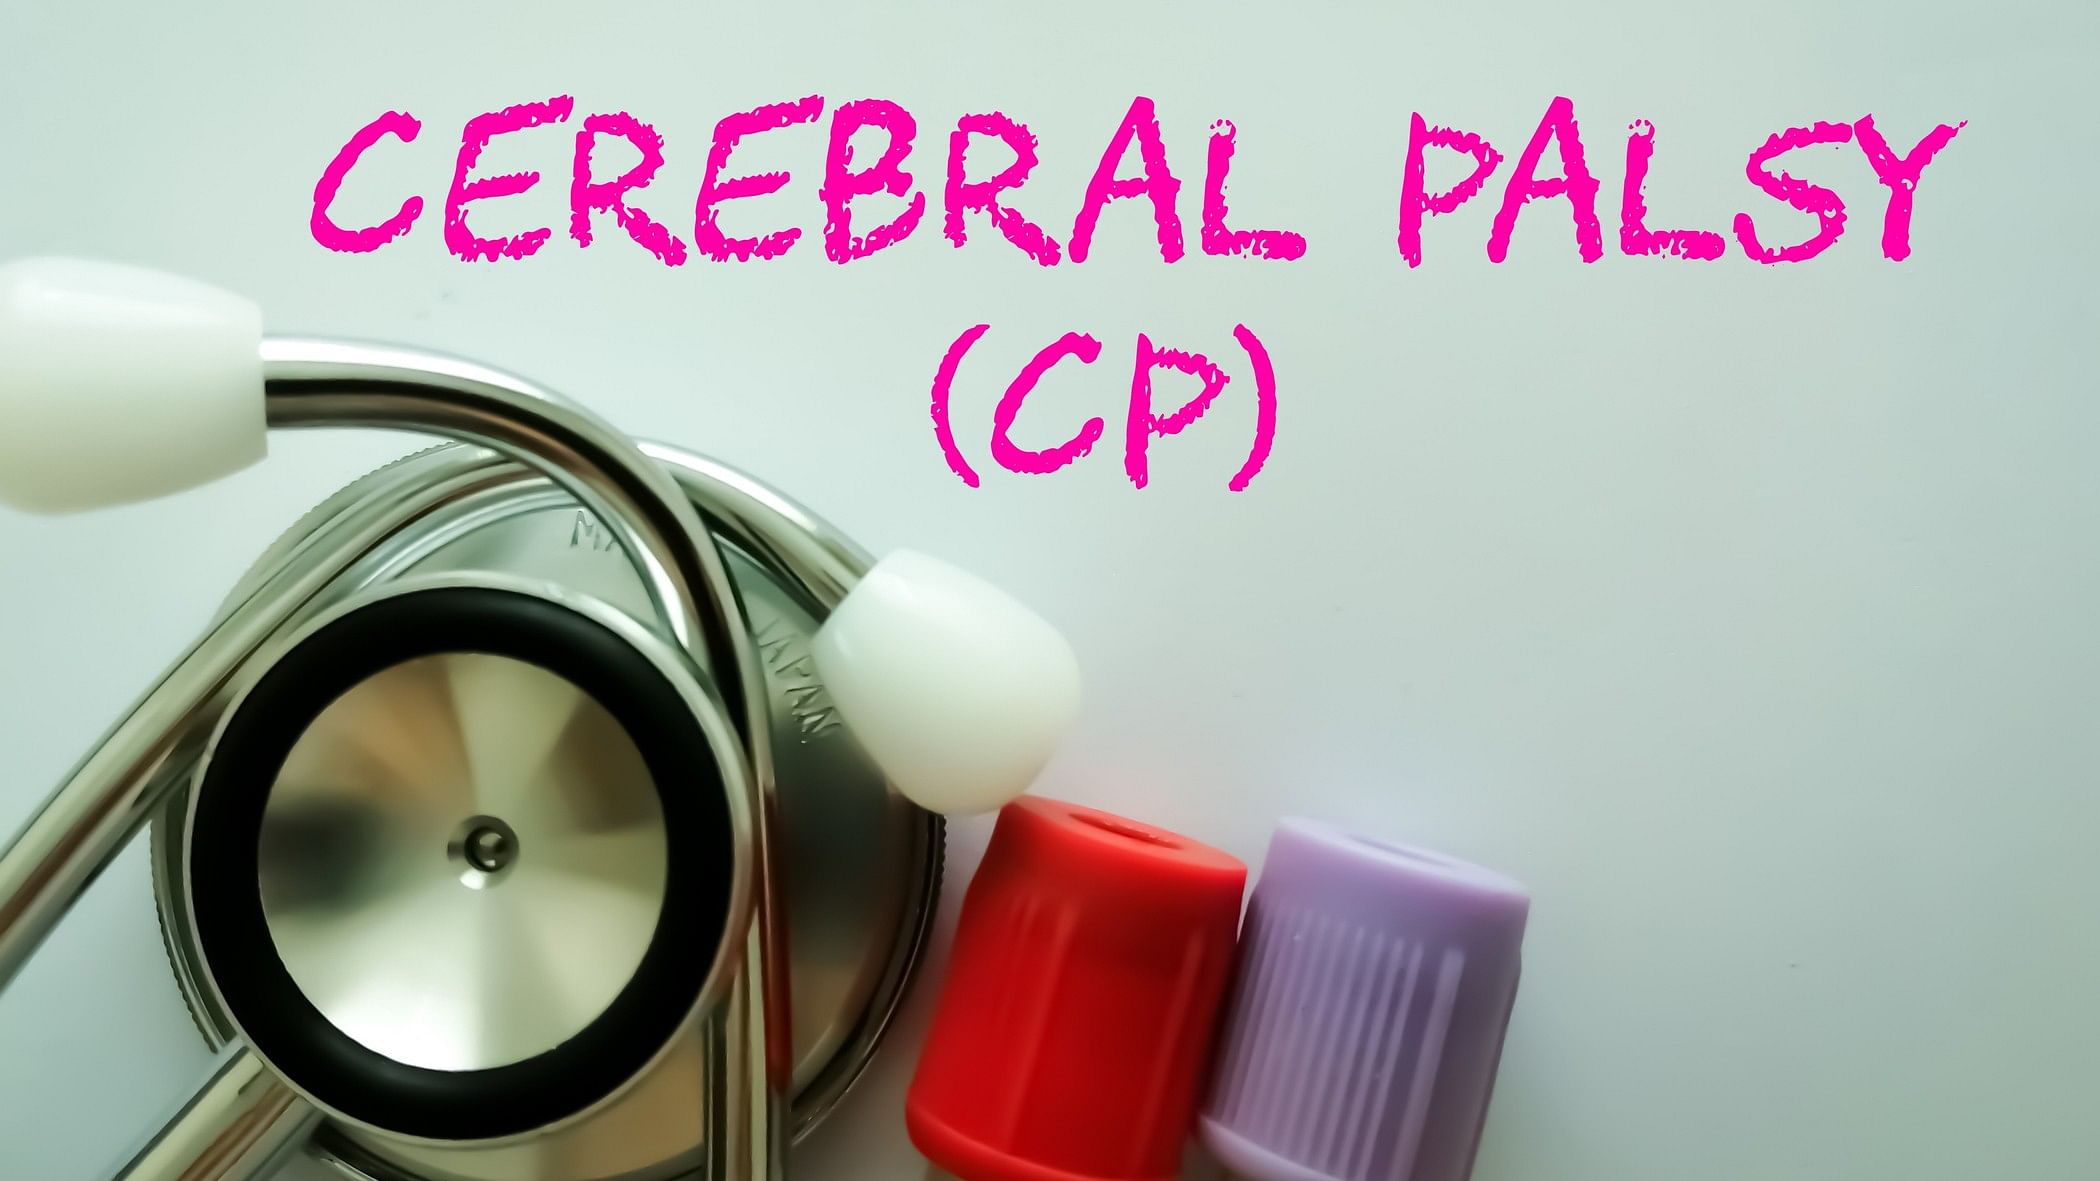 <div class="paragraphs"><p>Cerebral palsy is a disorder affecting one's ability to move. It is the most common motor disability in children, with symptoms emerging in infancy and early childhood.</p></div>